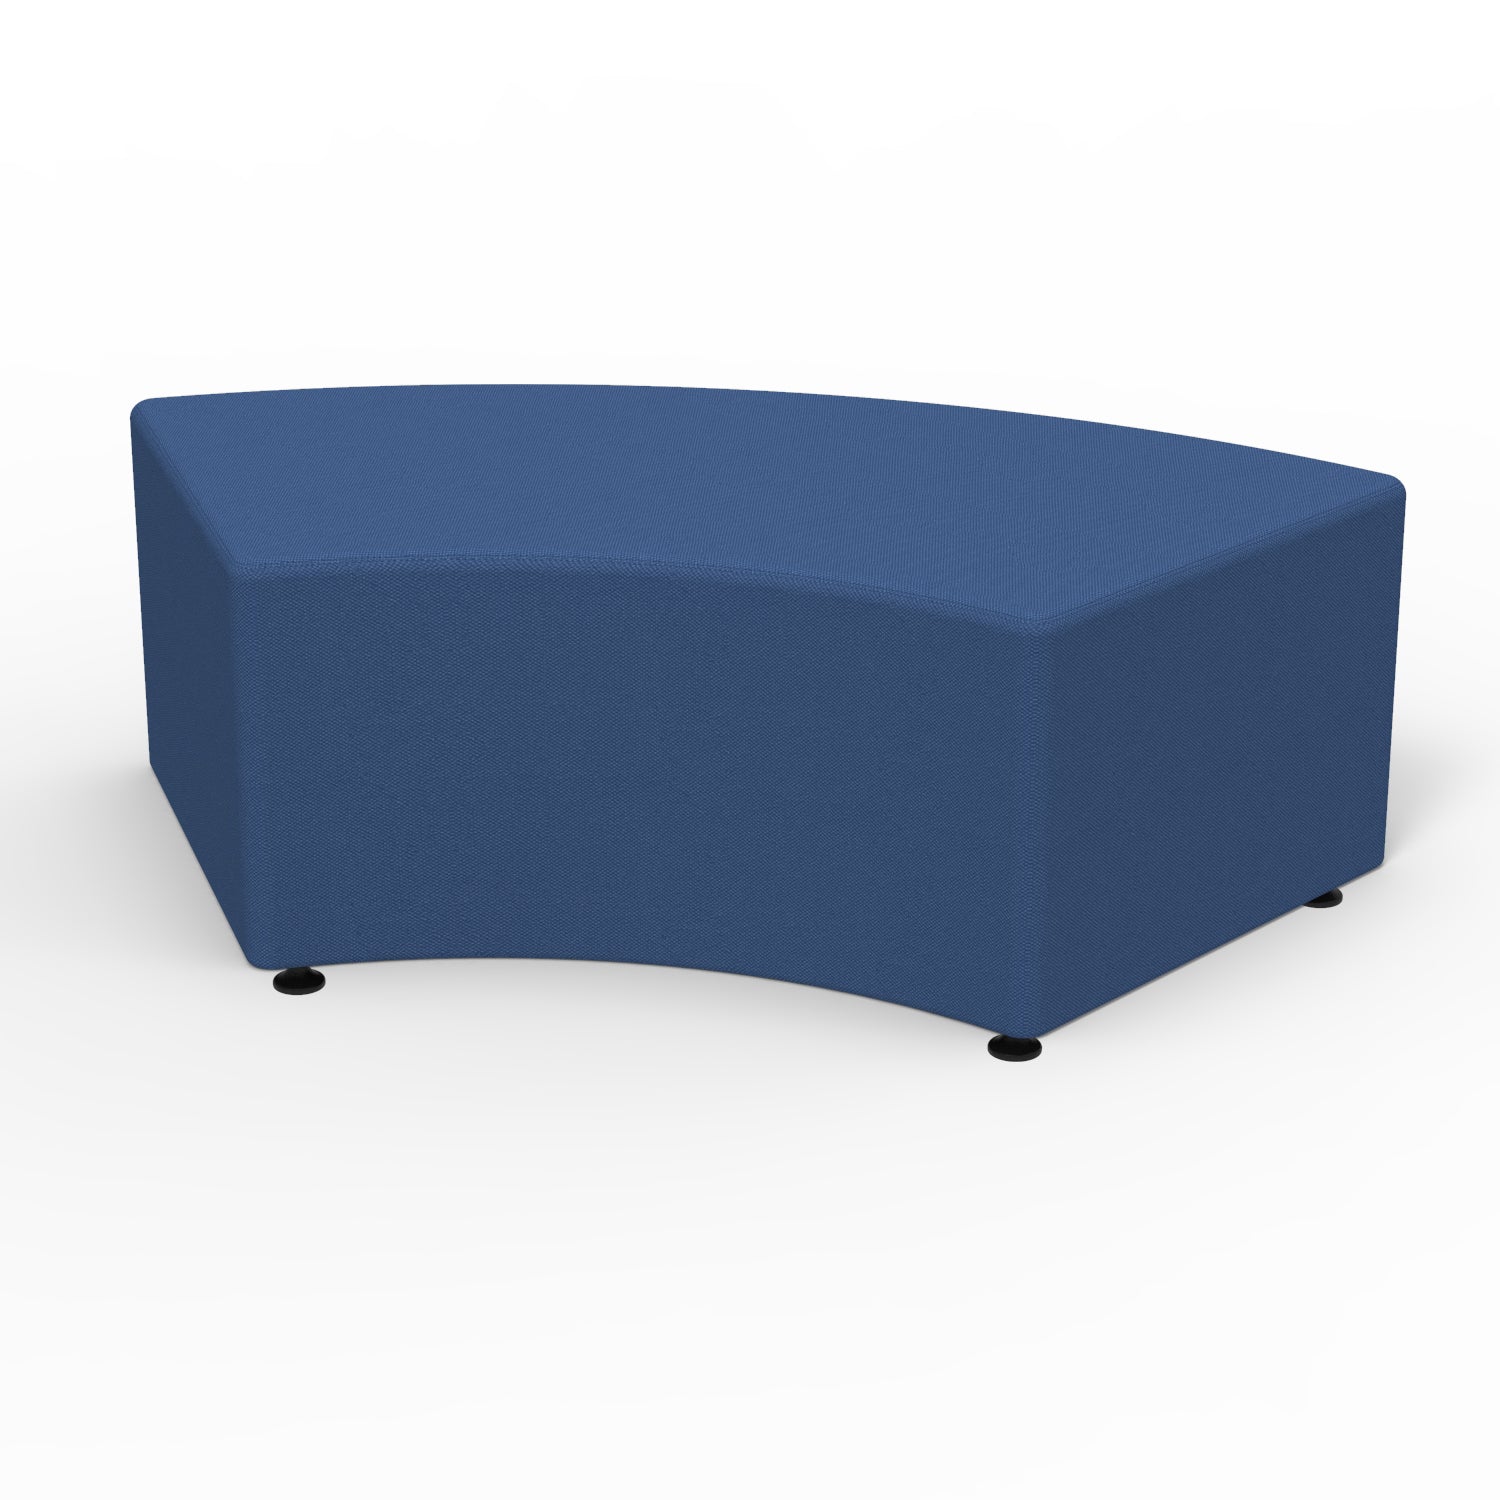 Sonik Soft Seating 60° Curved Bench, 18" H